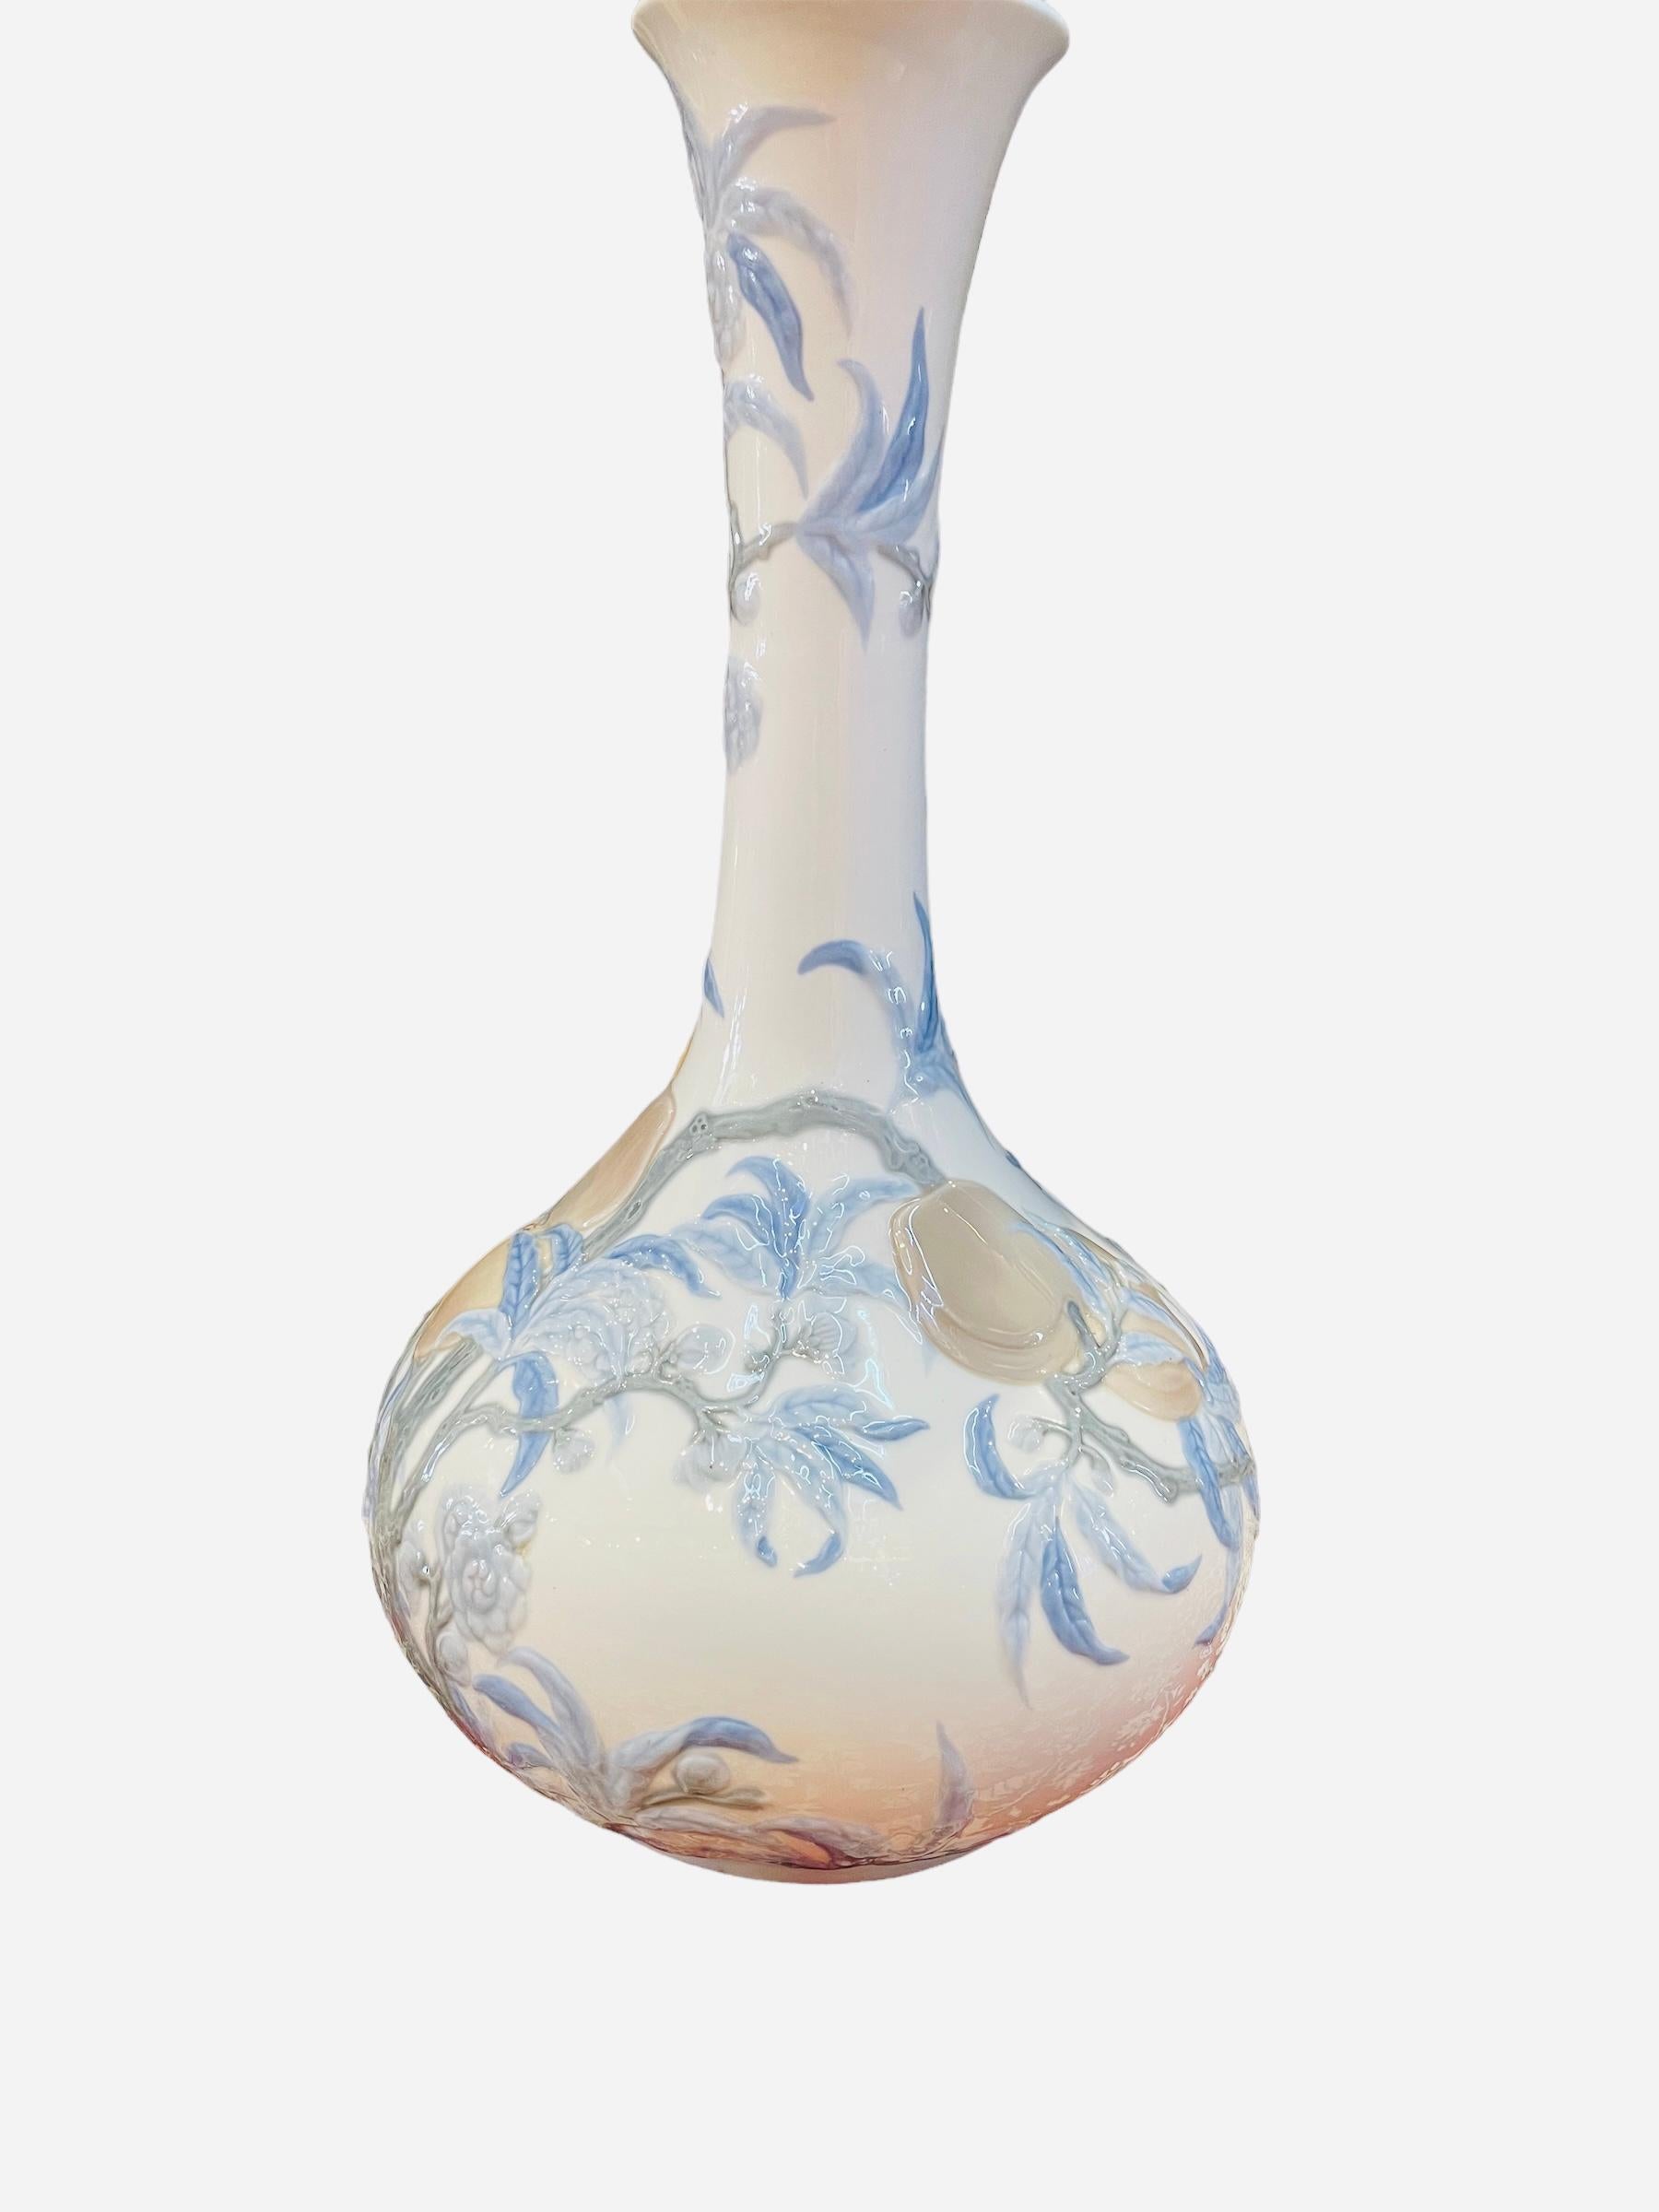 20th Century Lladro Porcelain Gourd Vase In Good Condition For Sale In Guaynabo, PR